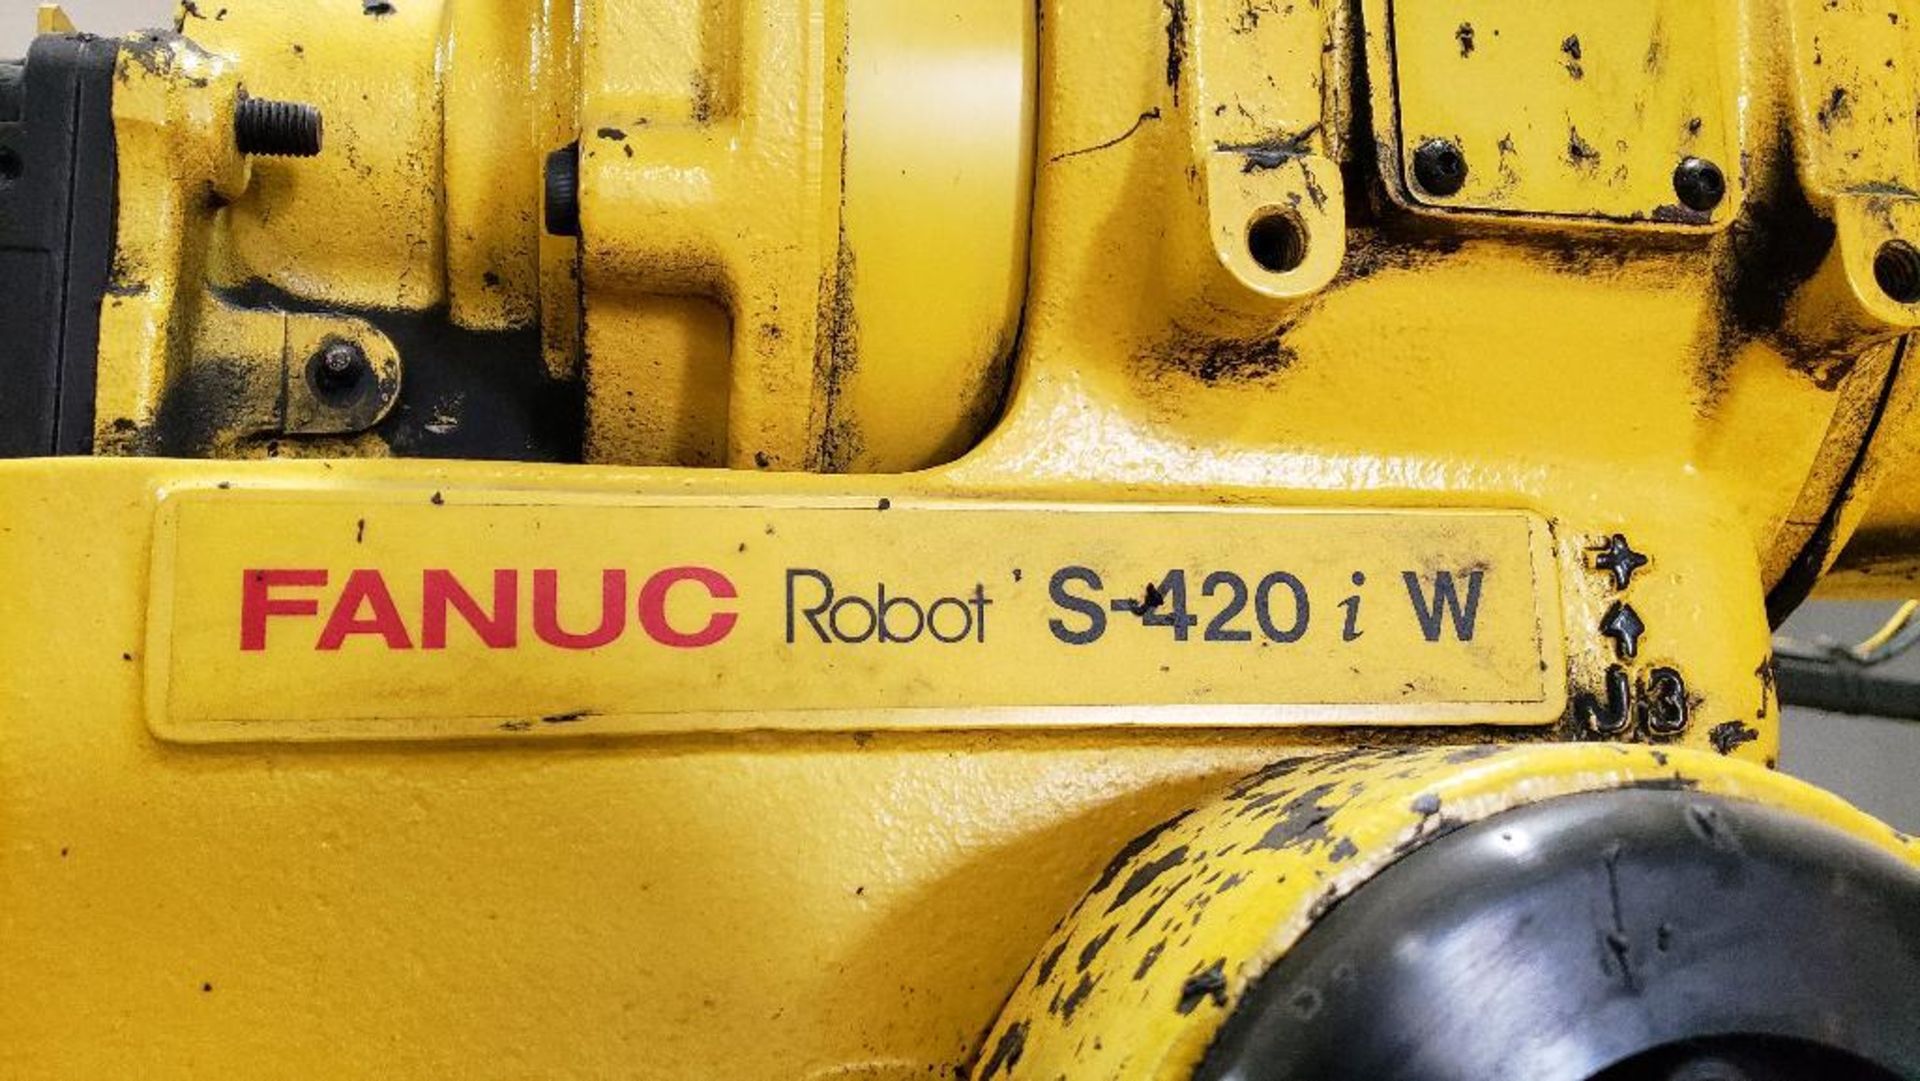 (Parts/Repairable) Fanuc S-420iW robot 6-axis arm. - Image 2 of 8